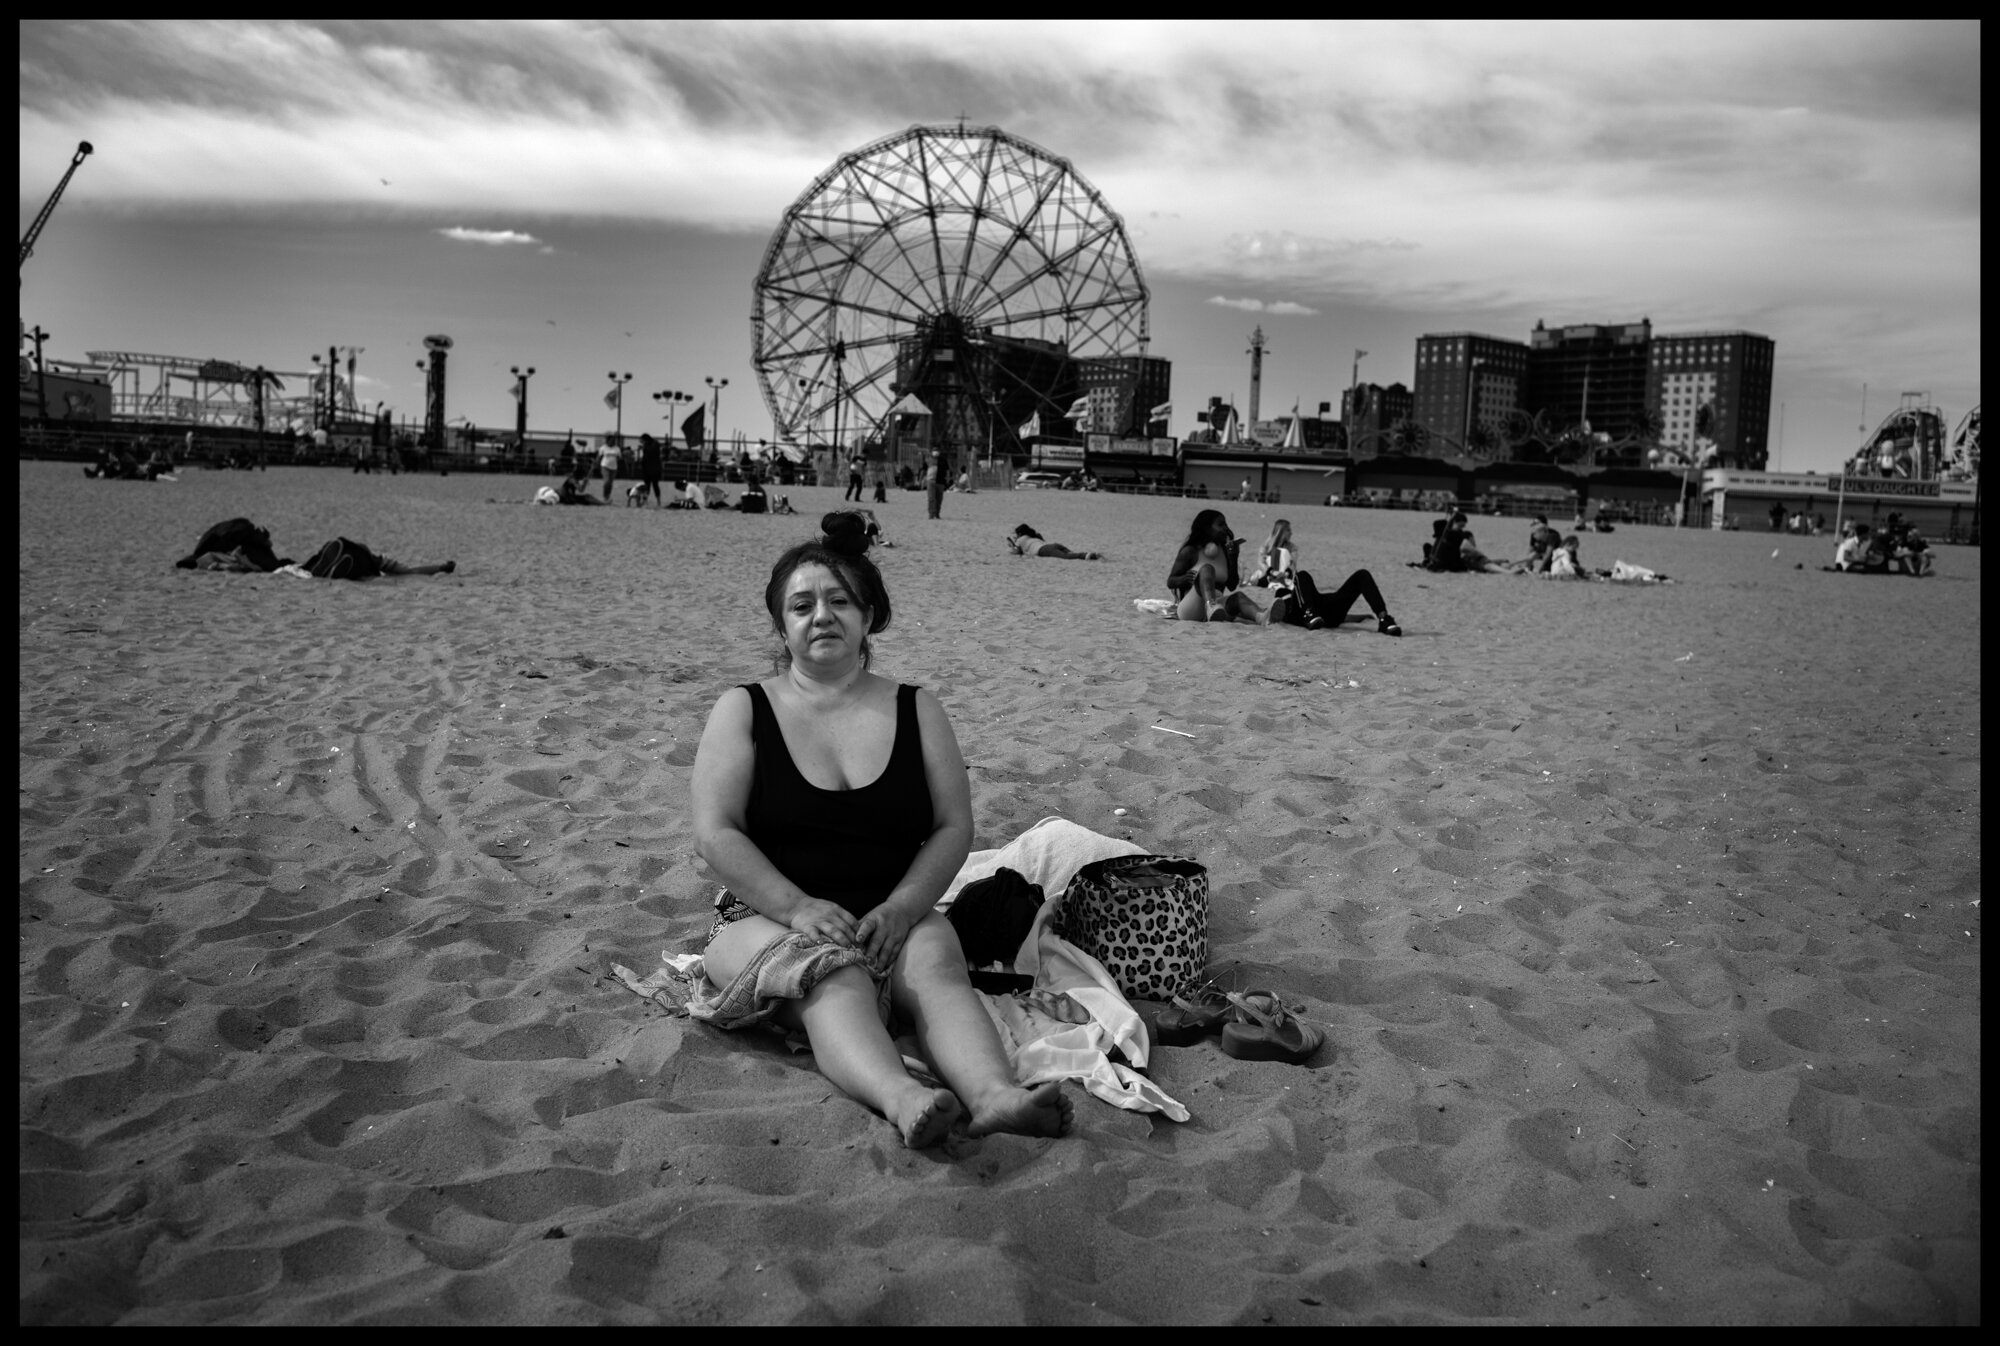  Myrtle, from Brooklyn, sat alone looking at the ocean in peace and with dignity. She has lost her apartment during this crisis and is now living in a shelter, and told me, “hopefully things will come through soon”. Coney Island, New York.  May 16, 2